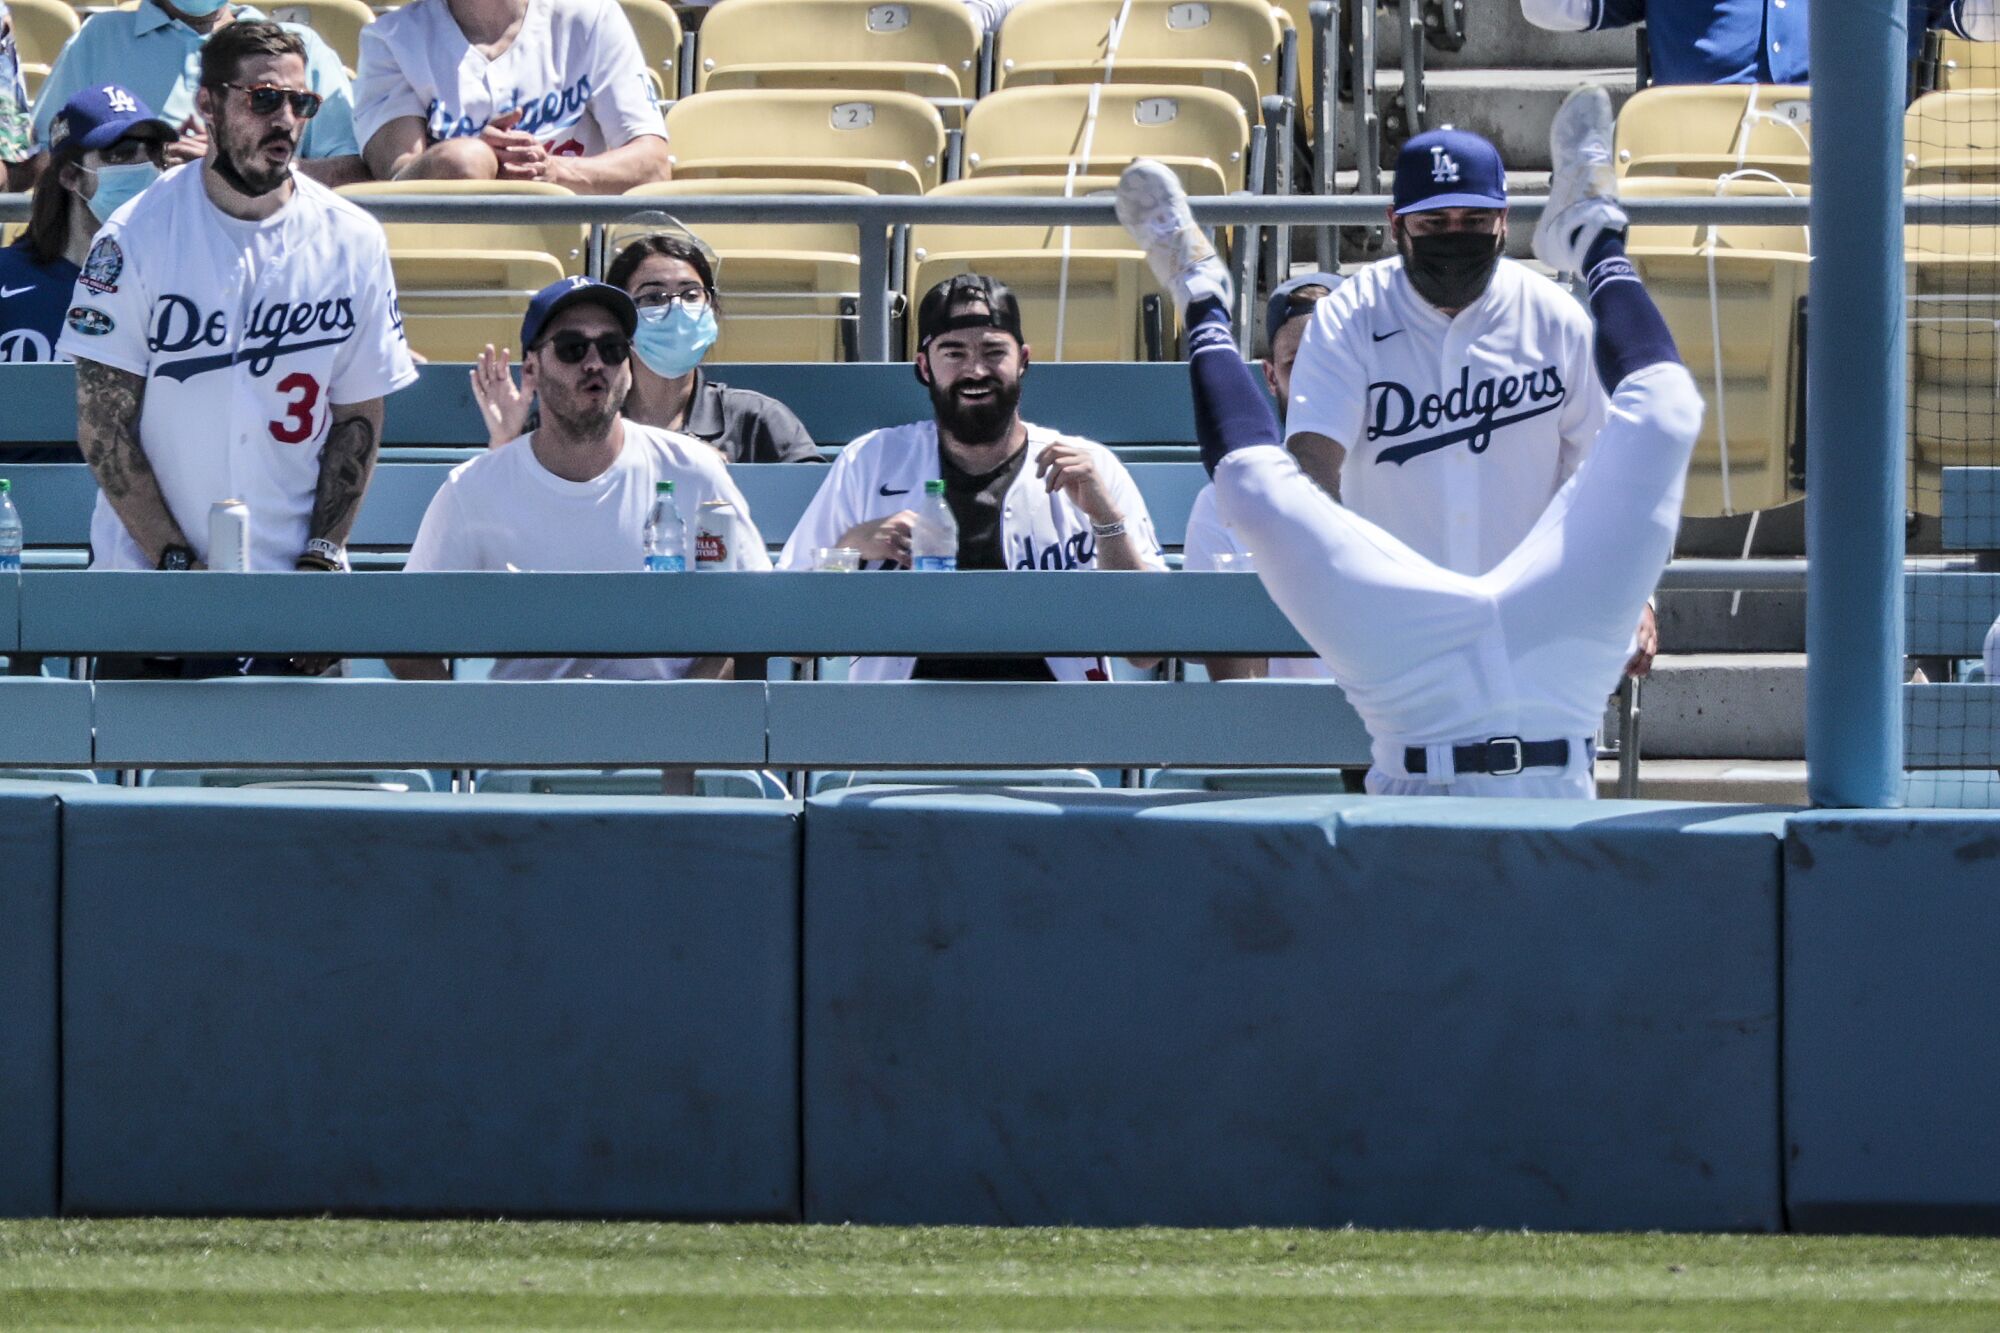 April 9: Dodgers second baseman Zach McKinstry tumbles over the wall while trying to catch a foul ball.